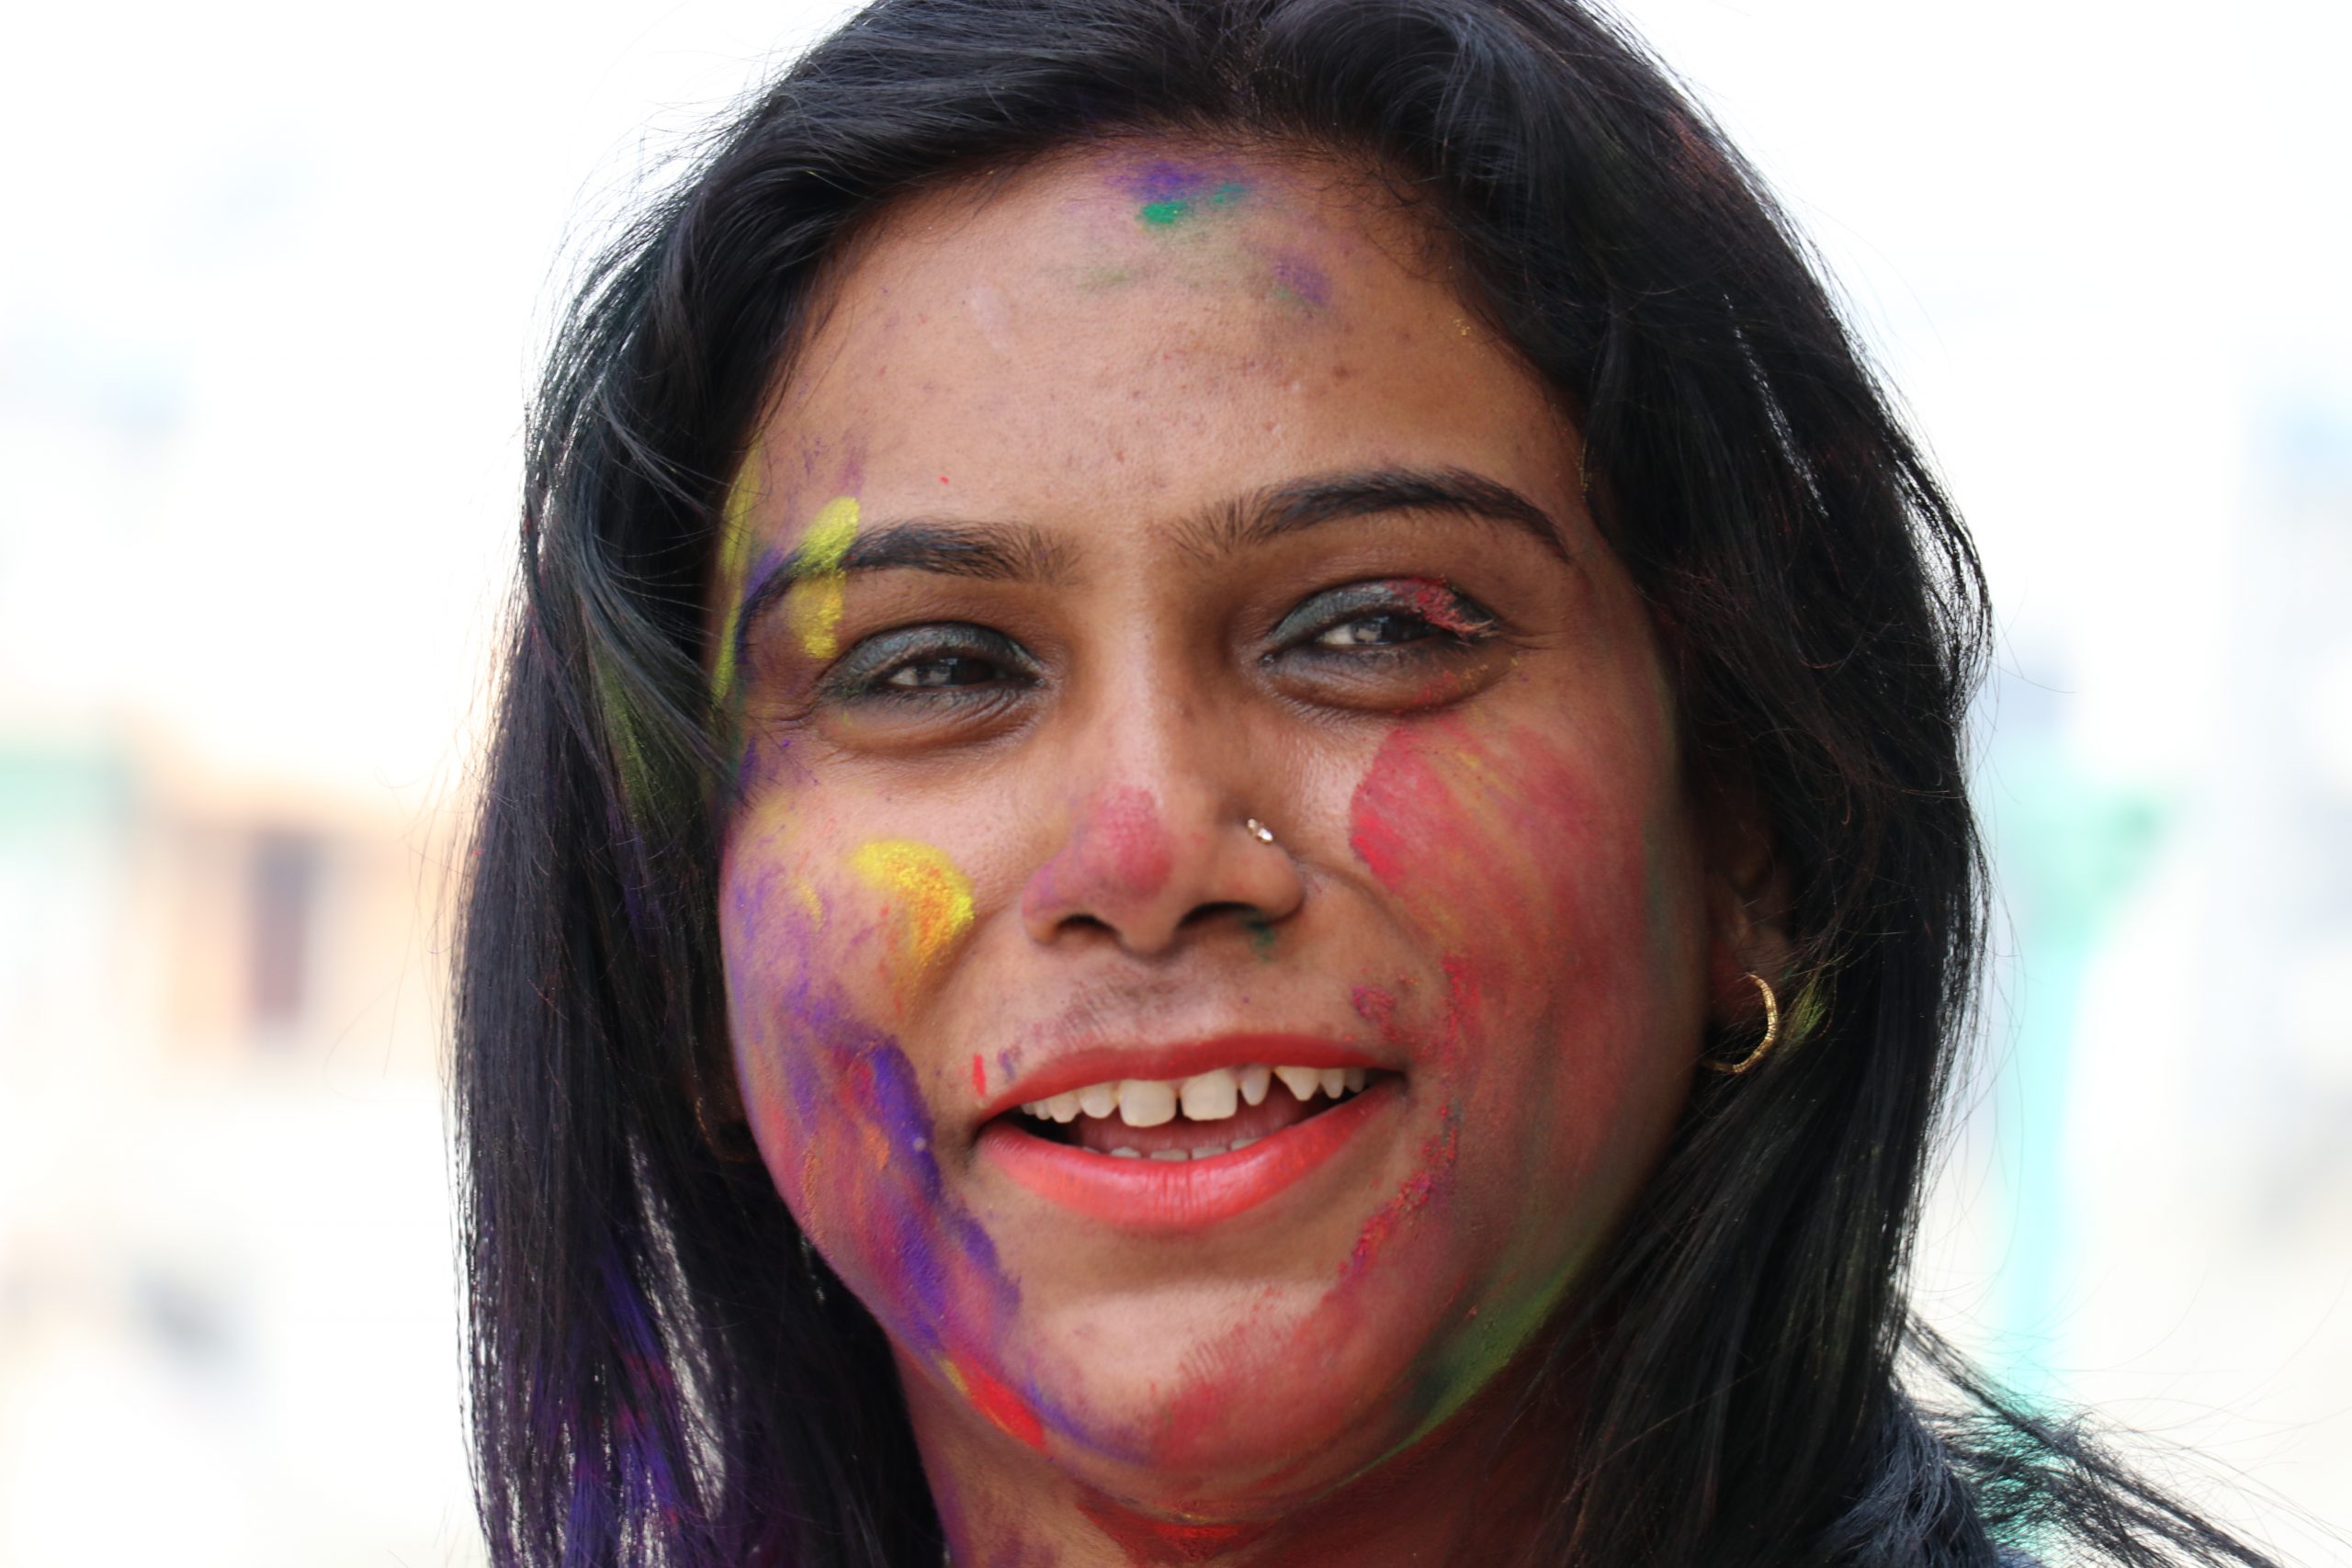 A woman face painted with Holi colors